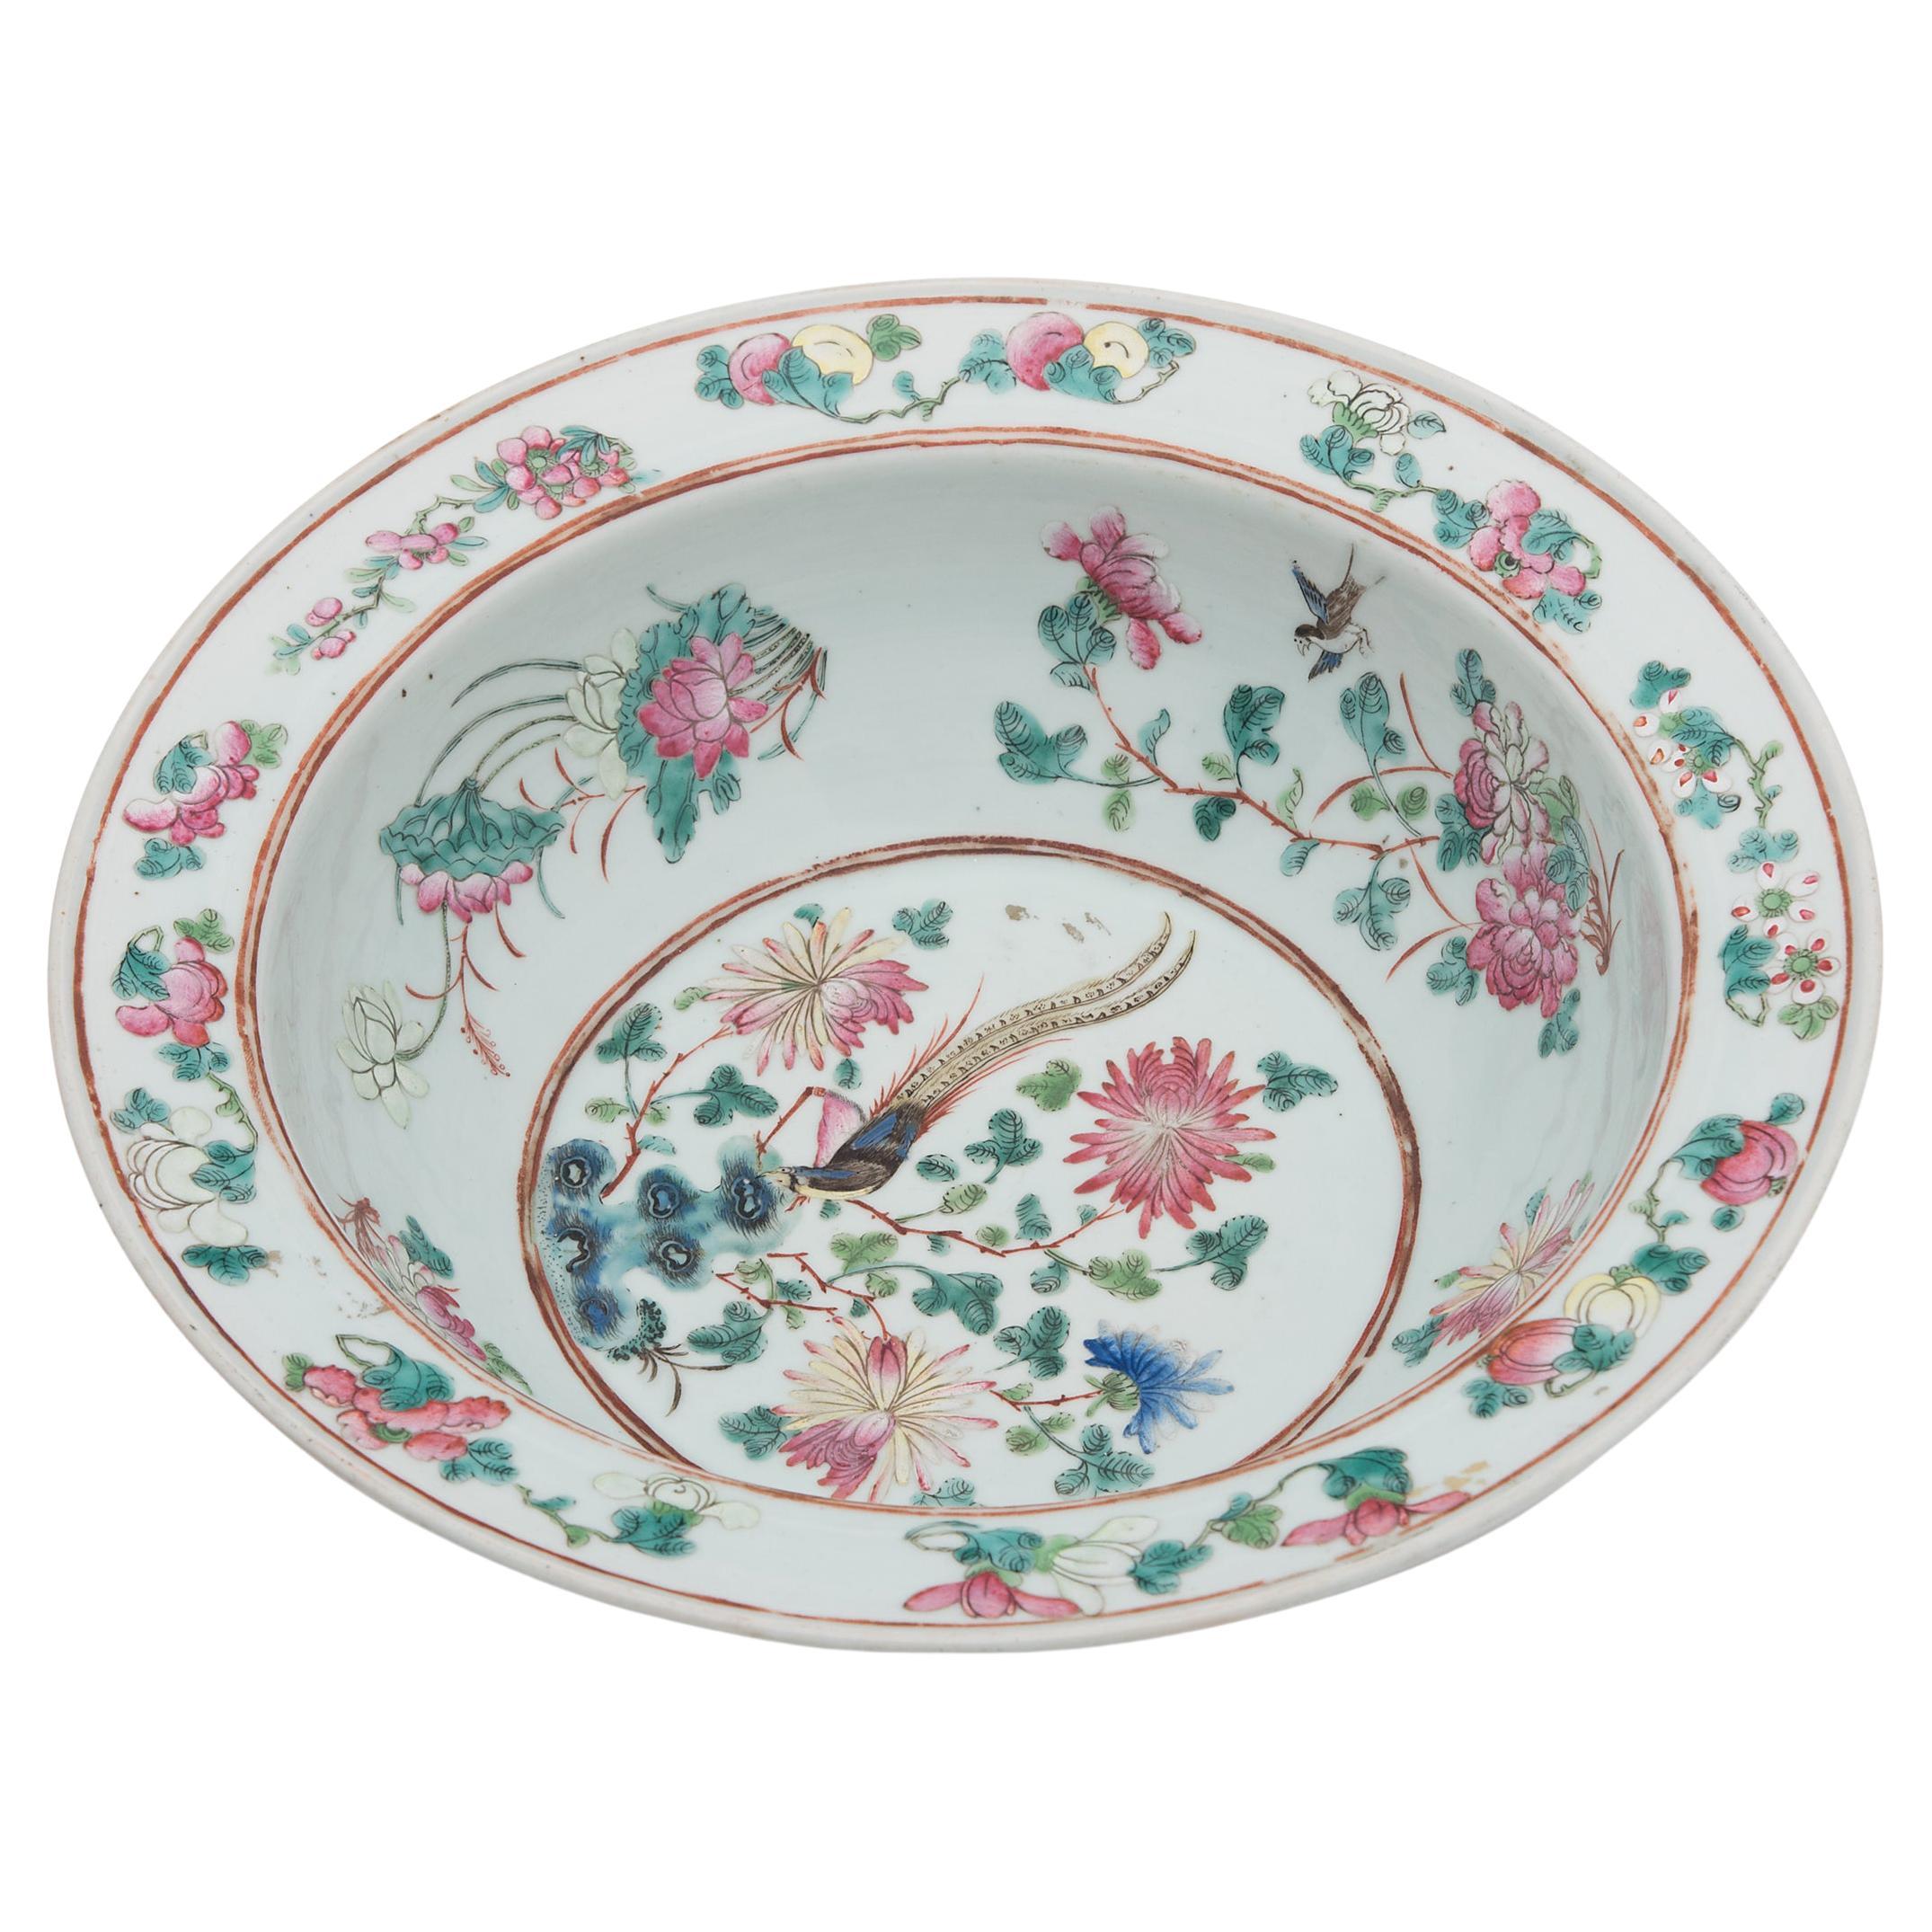 Chinese Famille Rose Bowl with Pheasant and Chrysanthemums, c. 1900